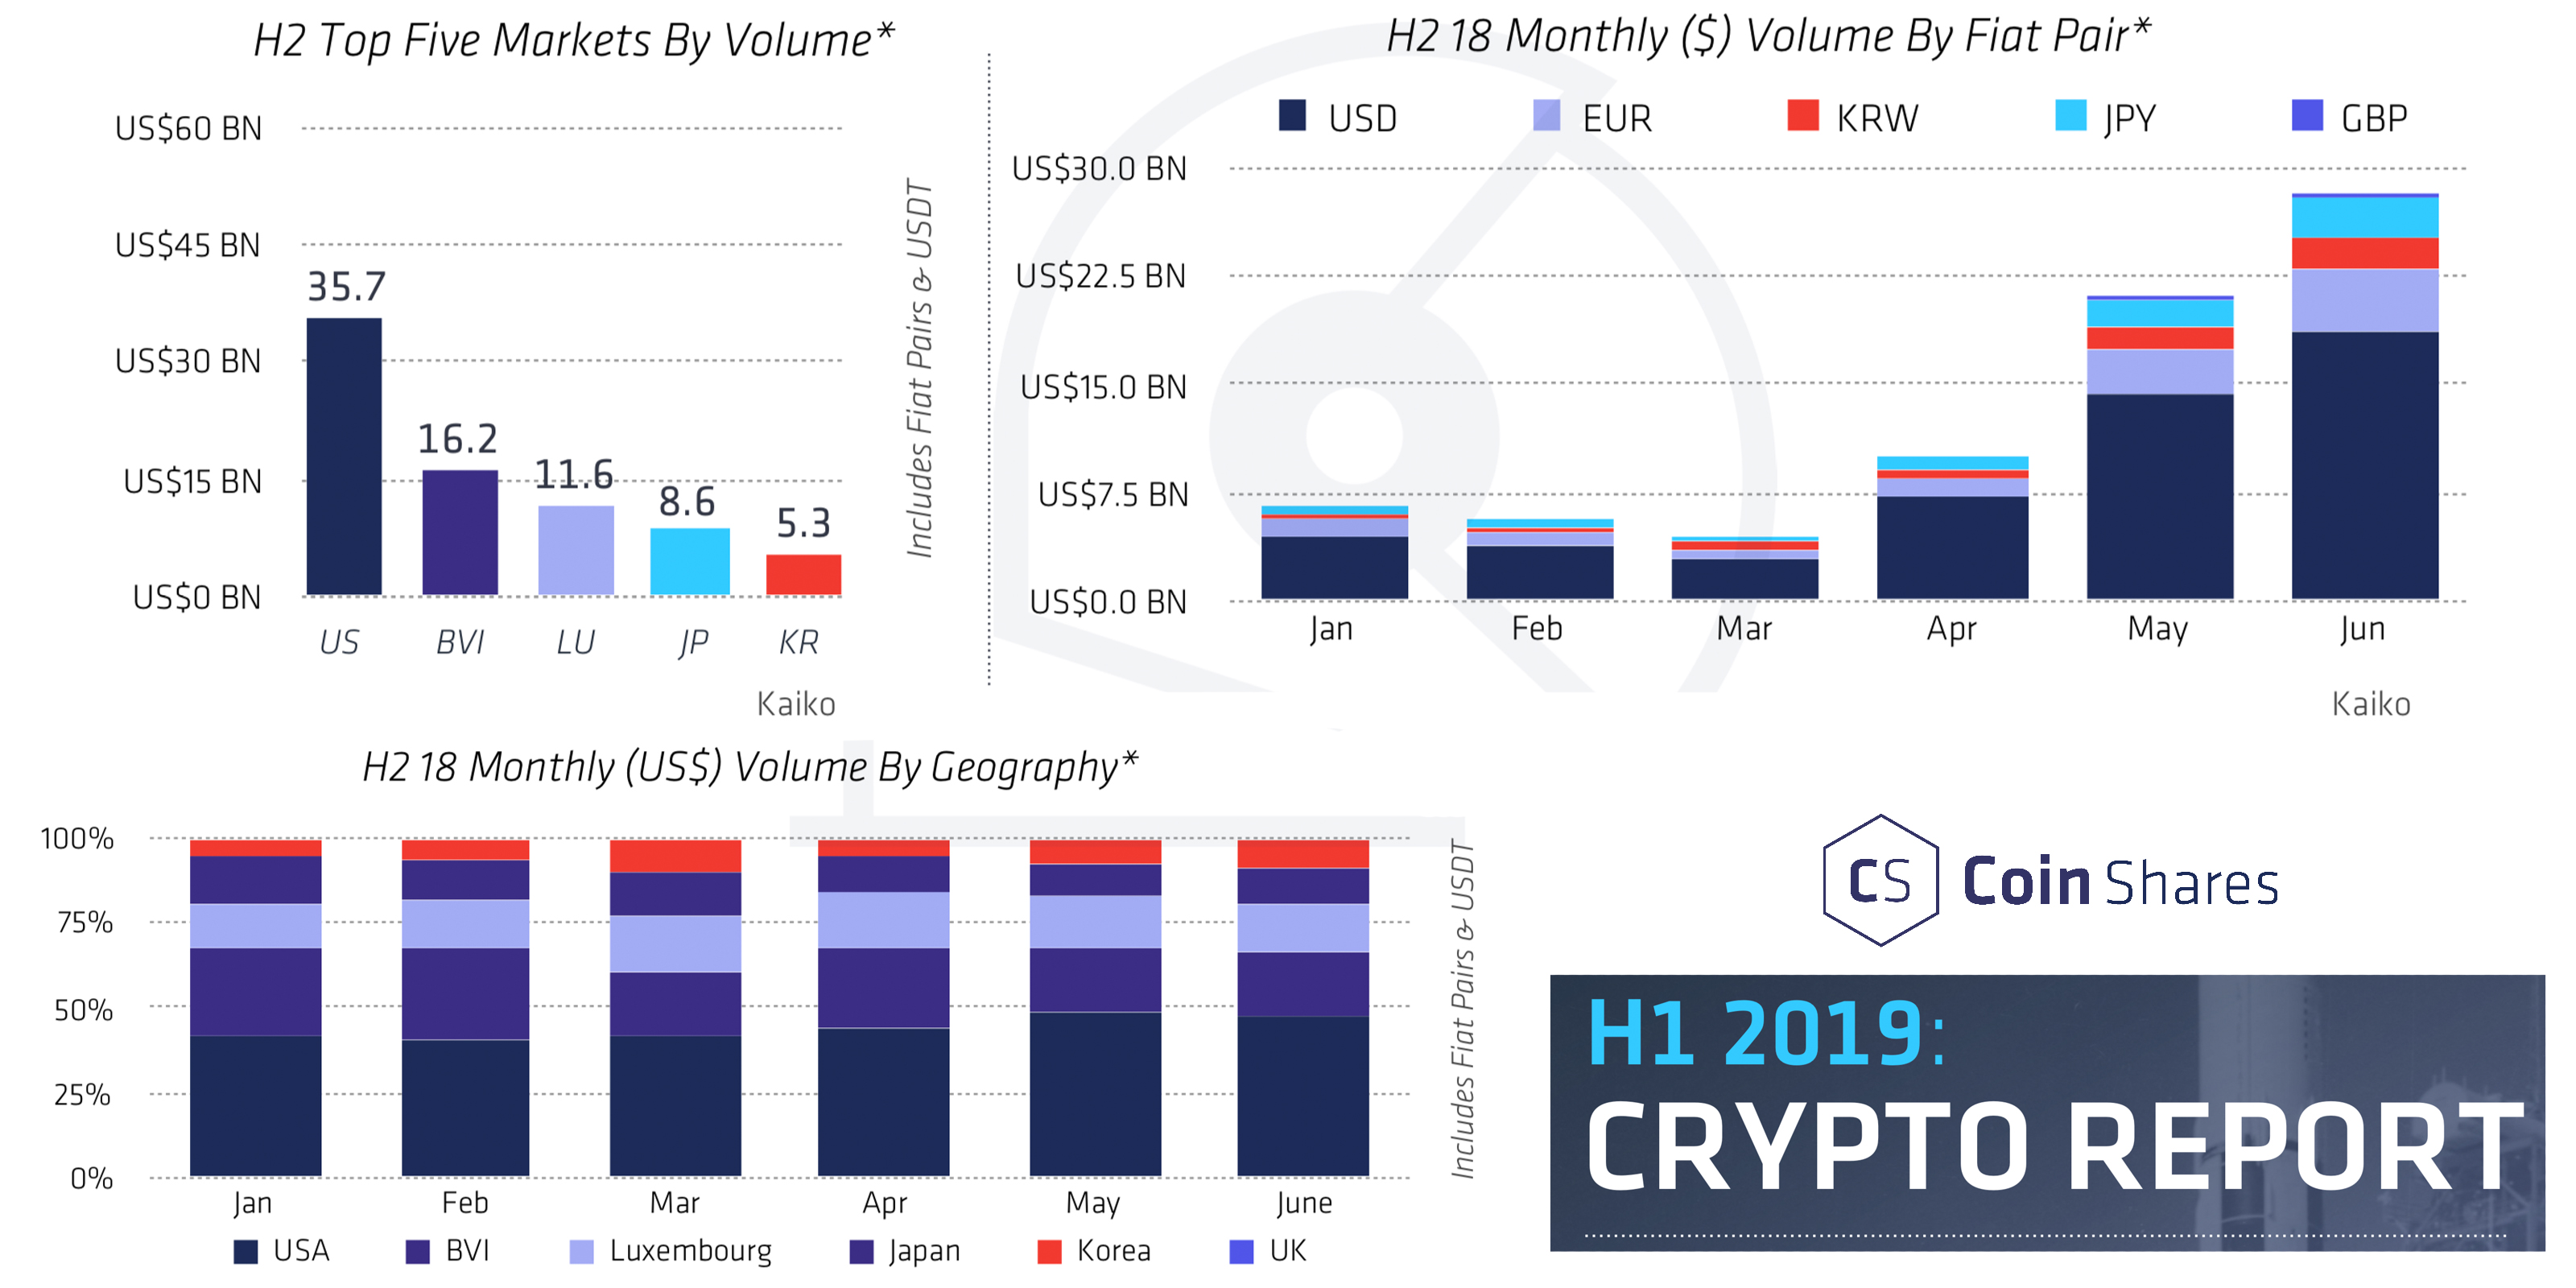 Research Reports Show Positive Crypto Industry Growth in H1 2019